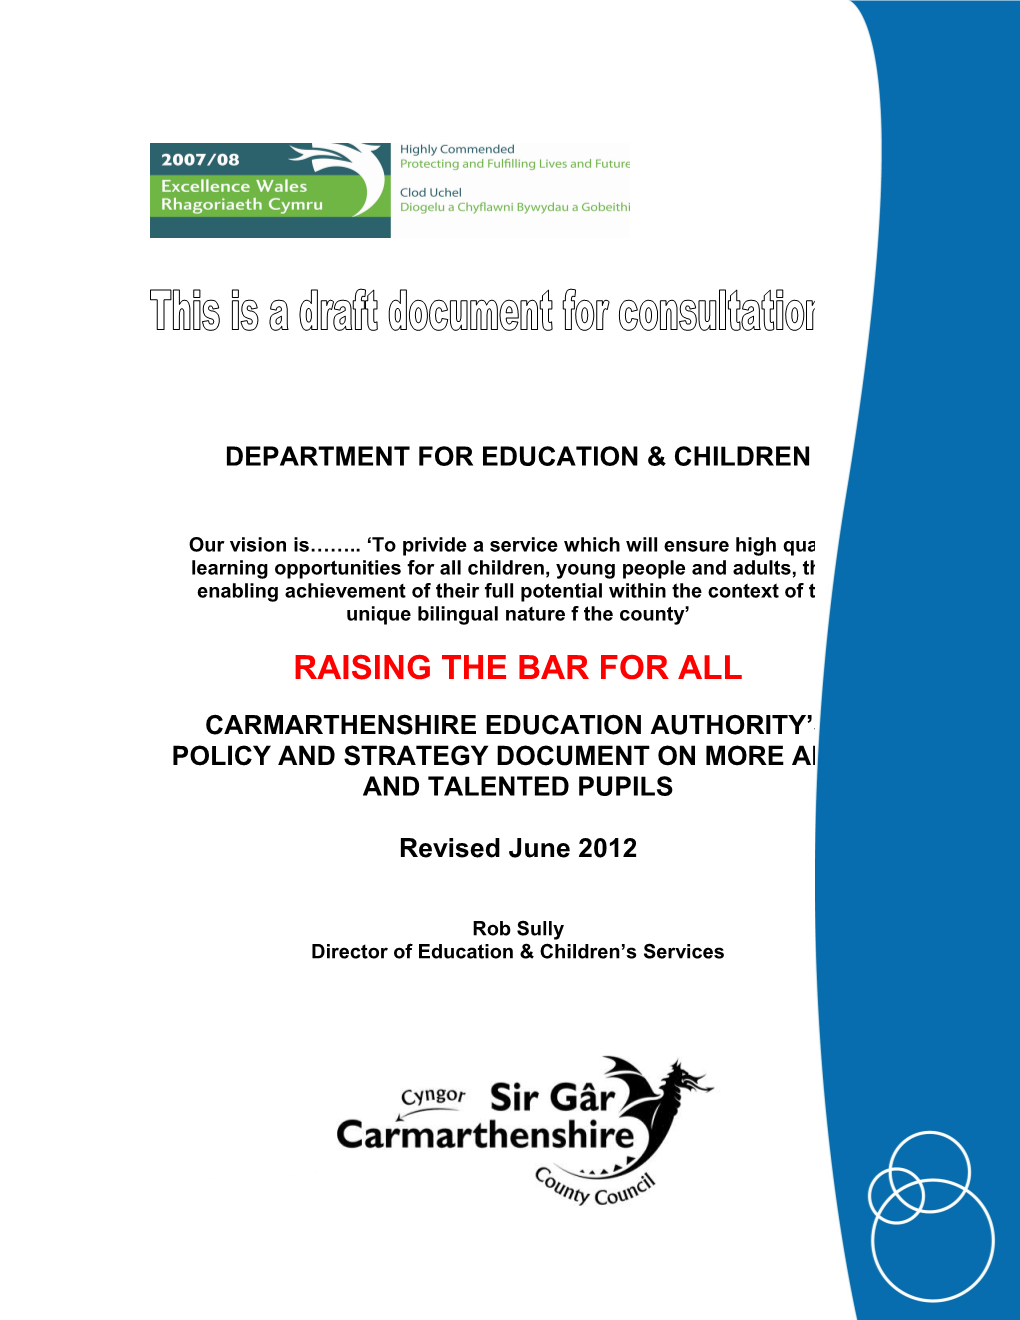 Carmarthenshire LEA Is Committed to Working with Its Pupils, Schools, Parents, Governors